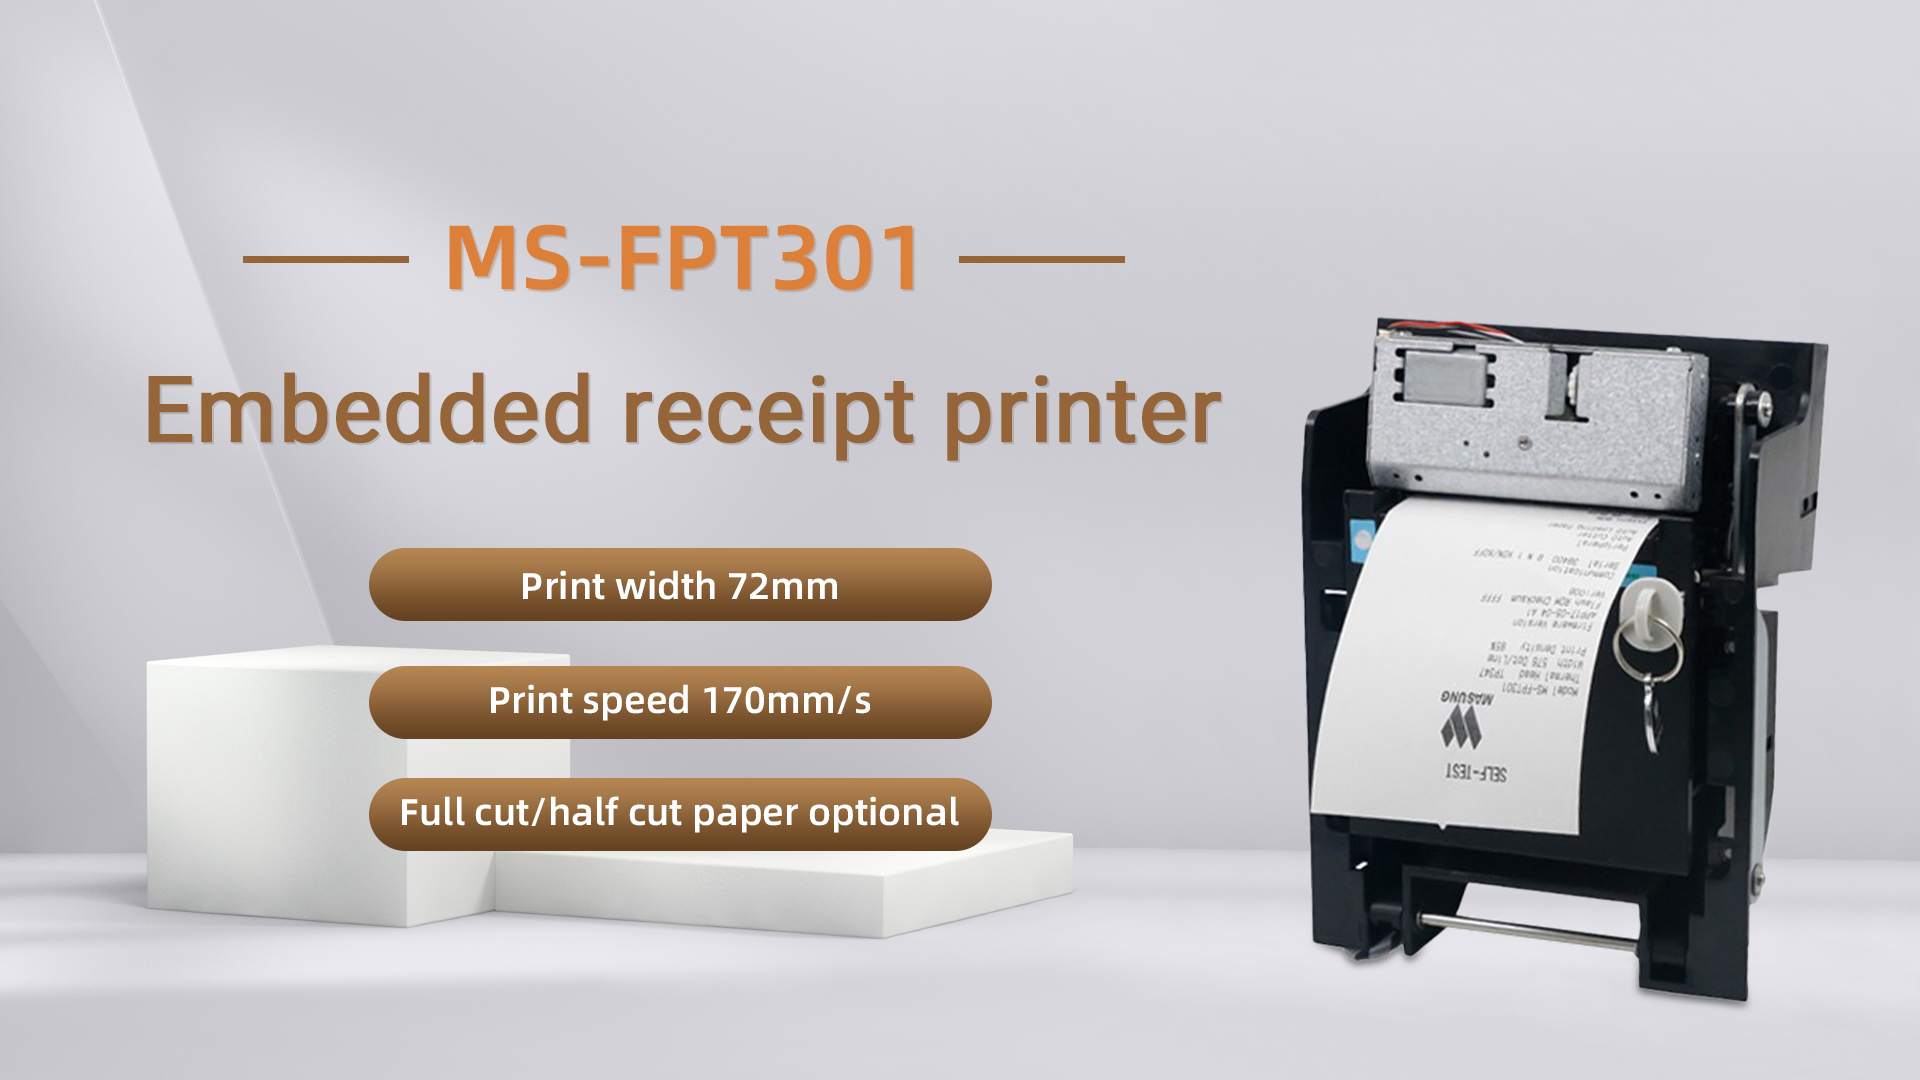 Masung printer MS-FPT301 provides a solution for self-service queuing ticket machines